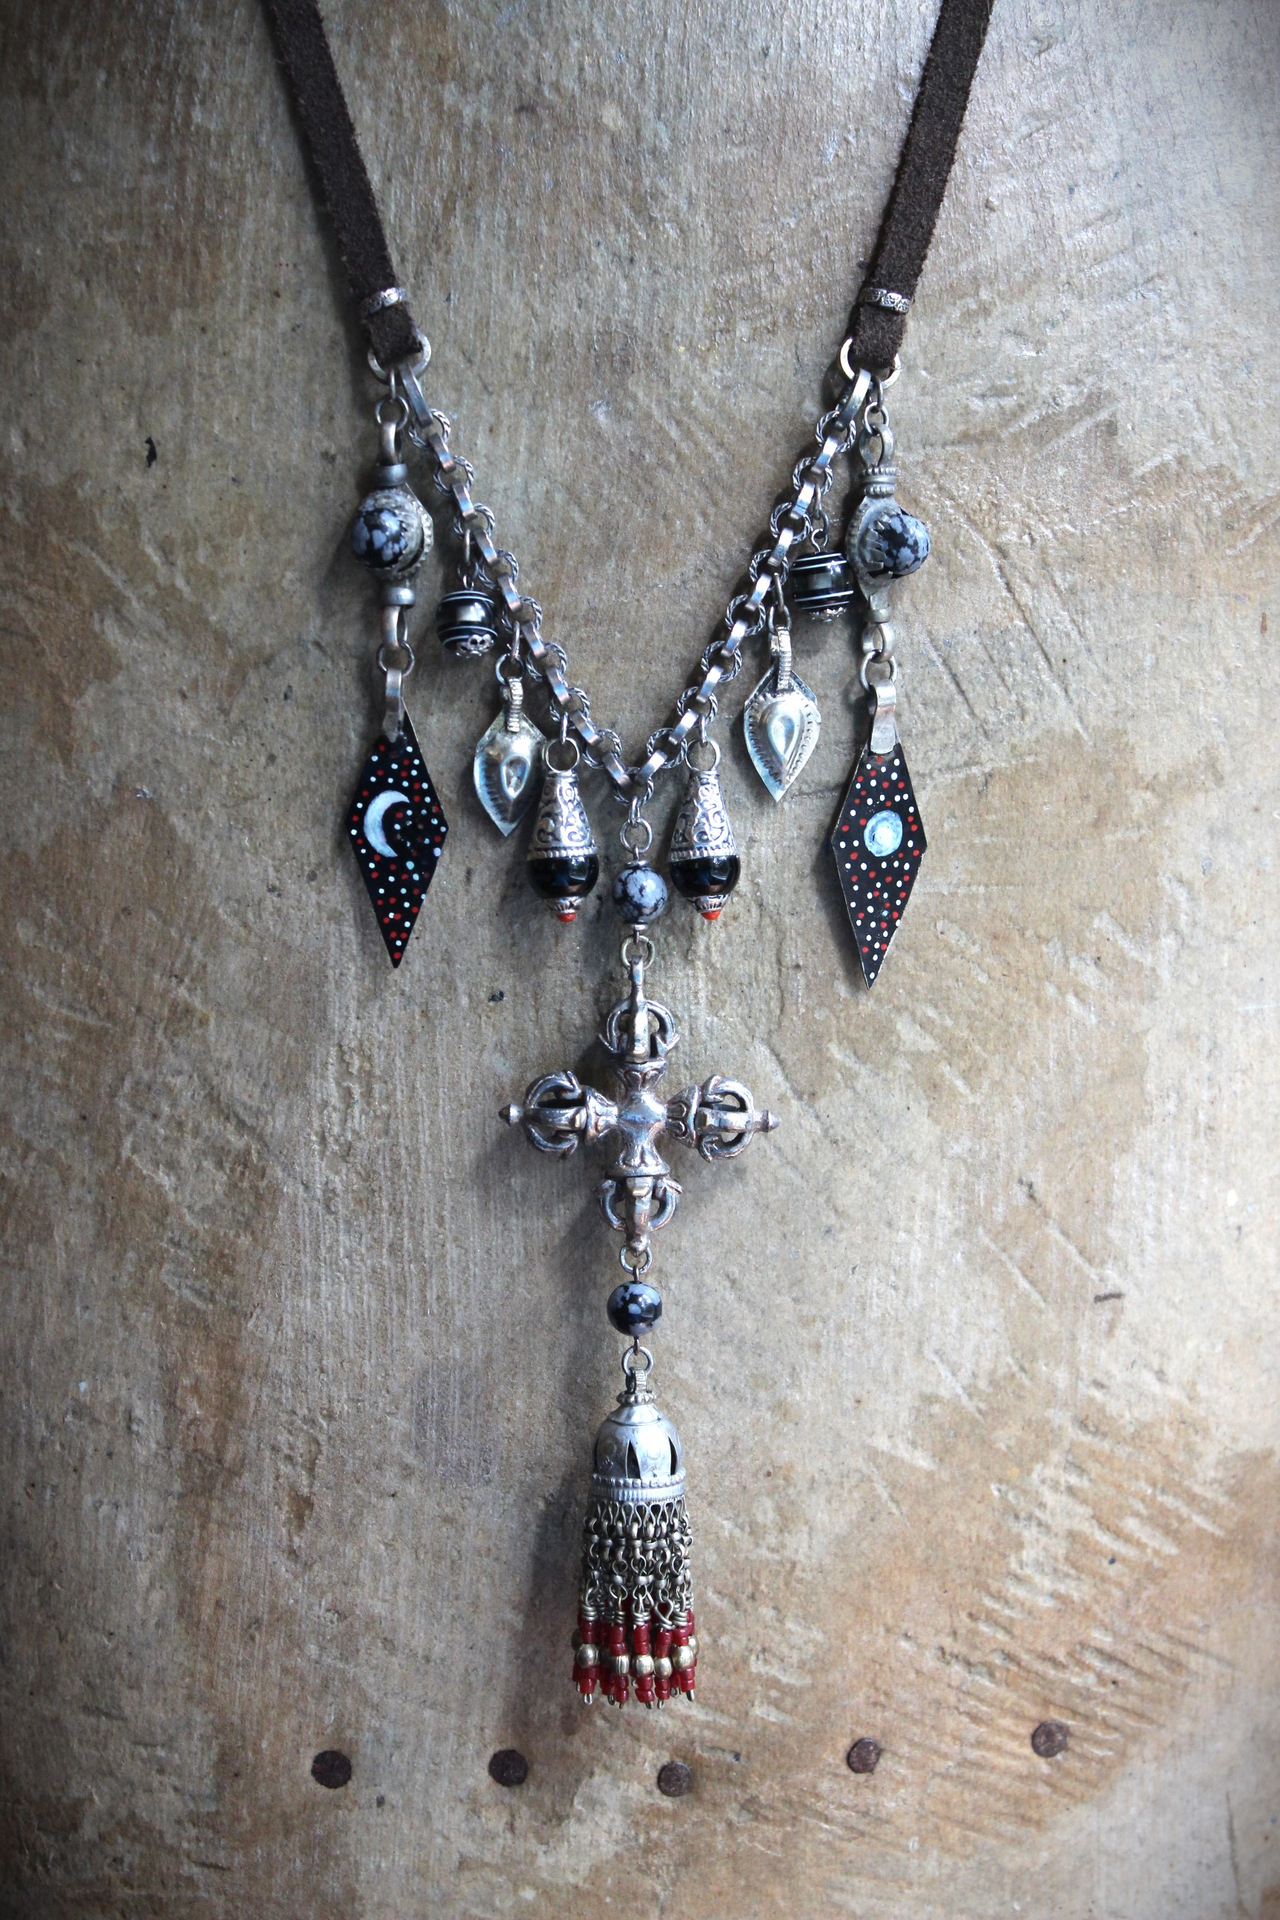 The Power of Enlightenment Necklace with Silver Double Vajra, Antique Kuchi Tassel and Findings, Painted Moon & Stars Drops and Leather Ties